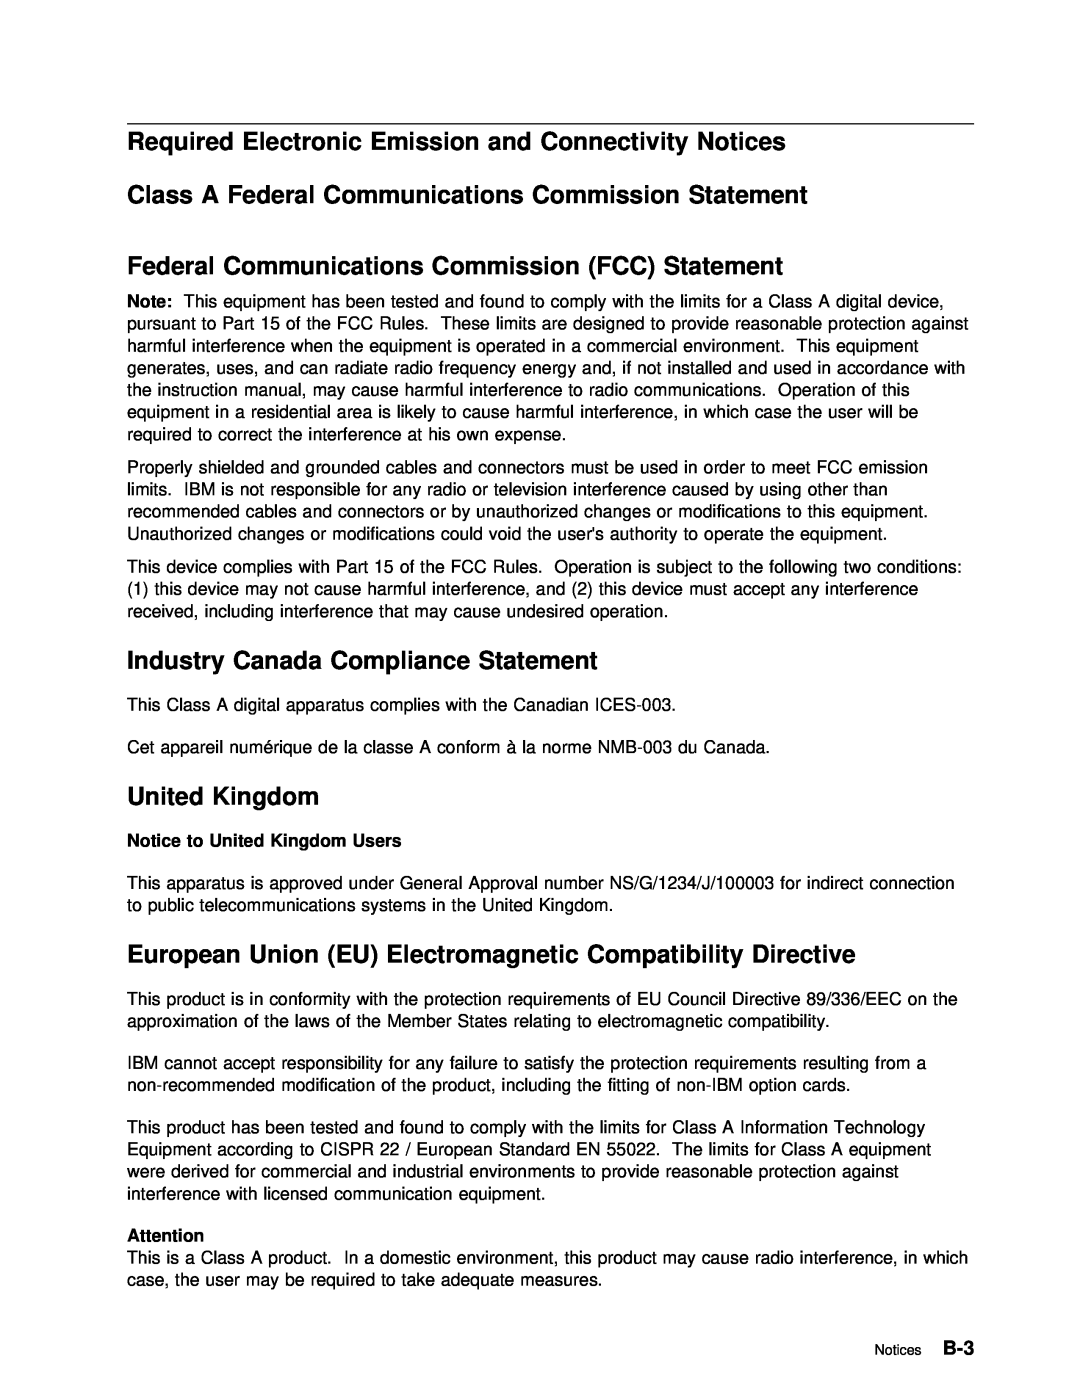 IBM ARTIC186 Connectivity Notices, FCC Statement, Industry Canada Compliance Statement, United Kingdom, Class, Federal 